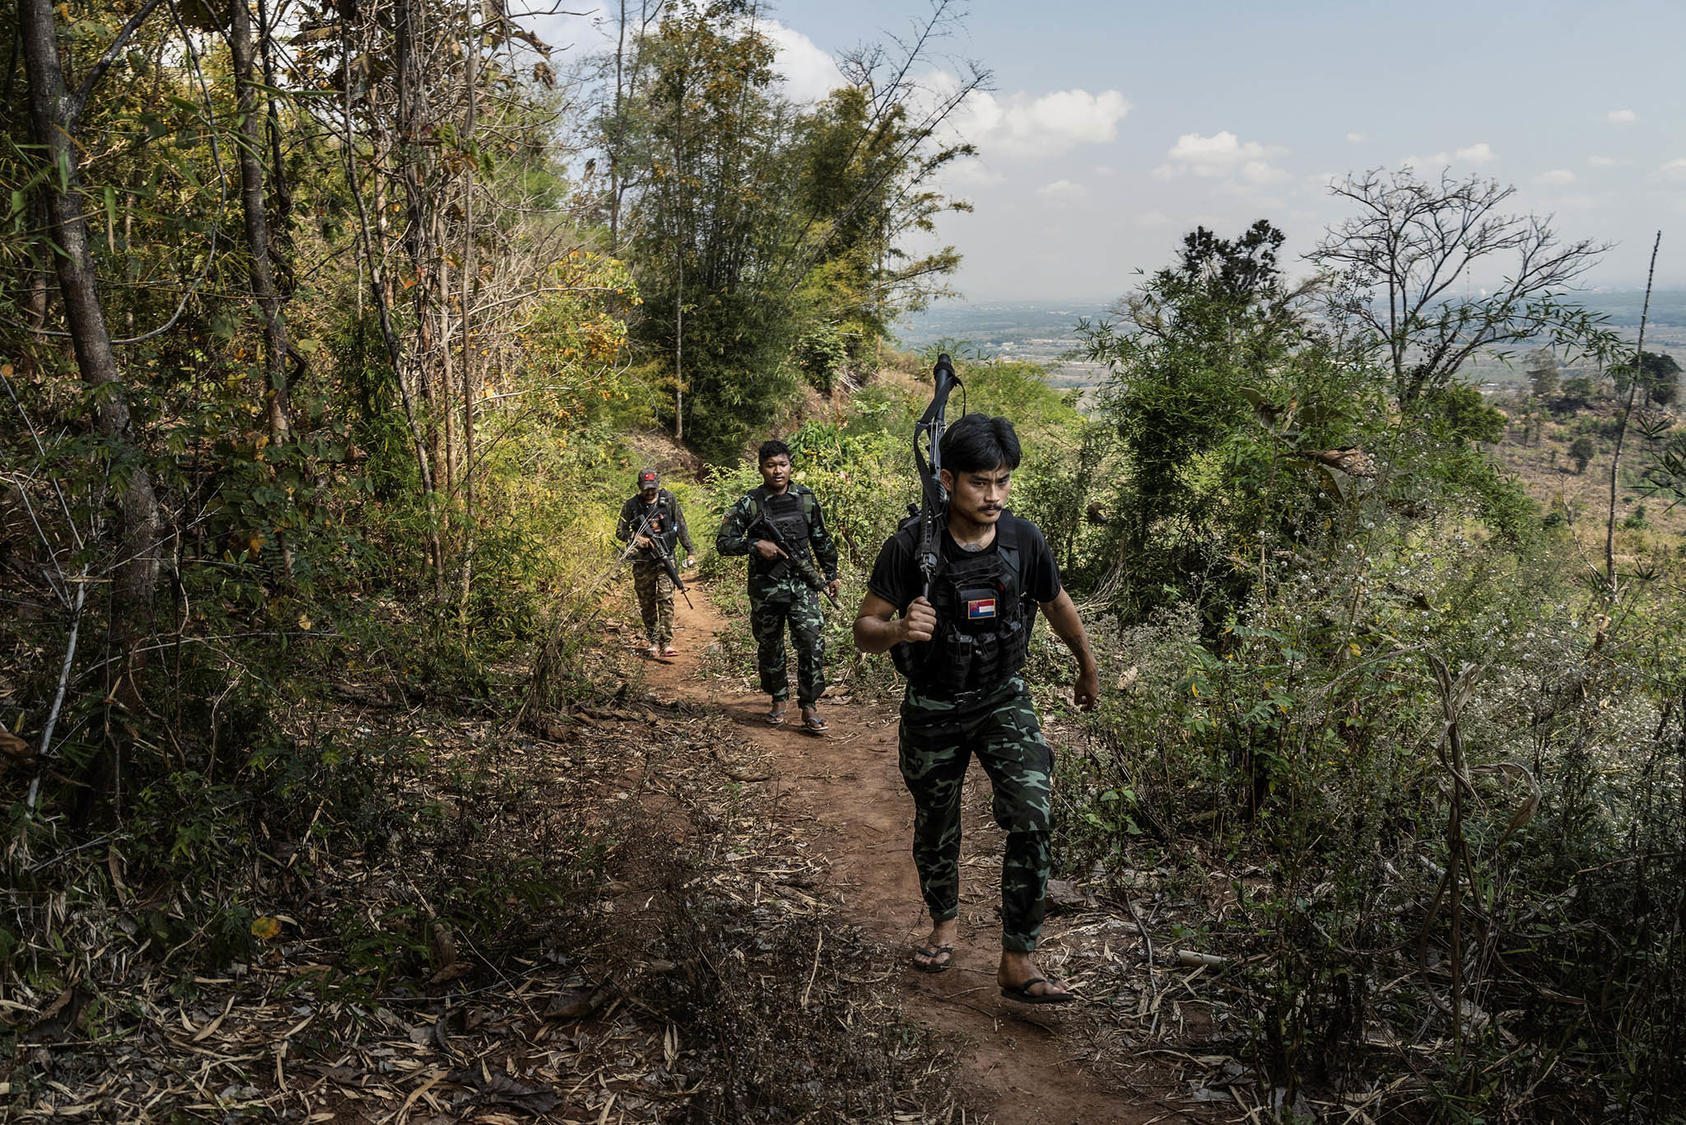 Members of an ethnic rebel group patrol a front-line area near government military positions in the Kayin State of Myanmar. March 9, 2022. (Adam Dean/The New York Times)